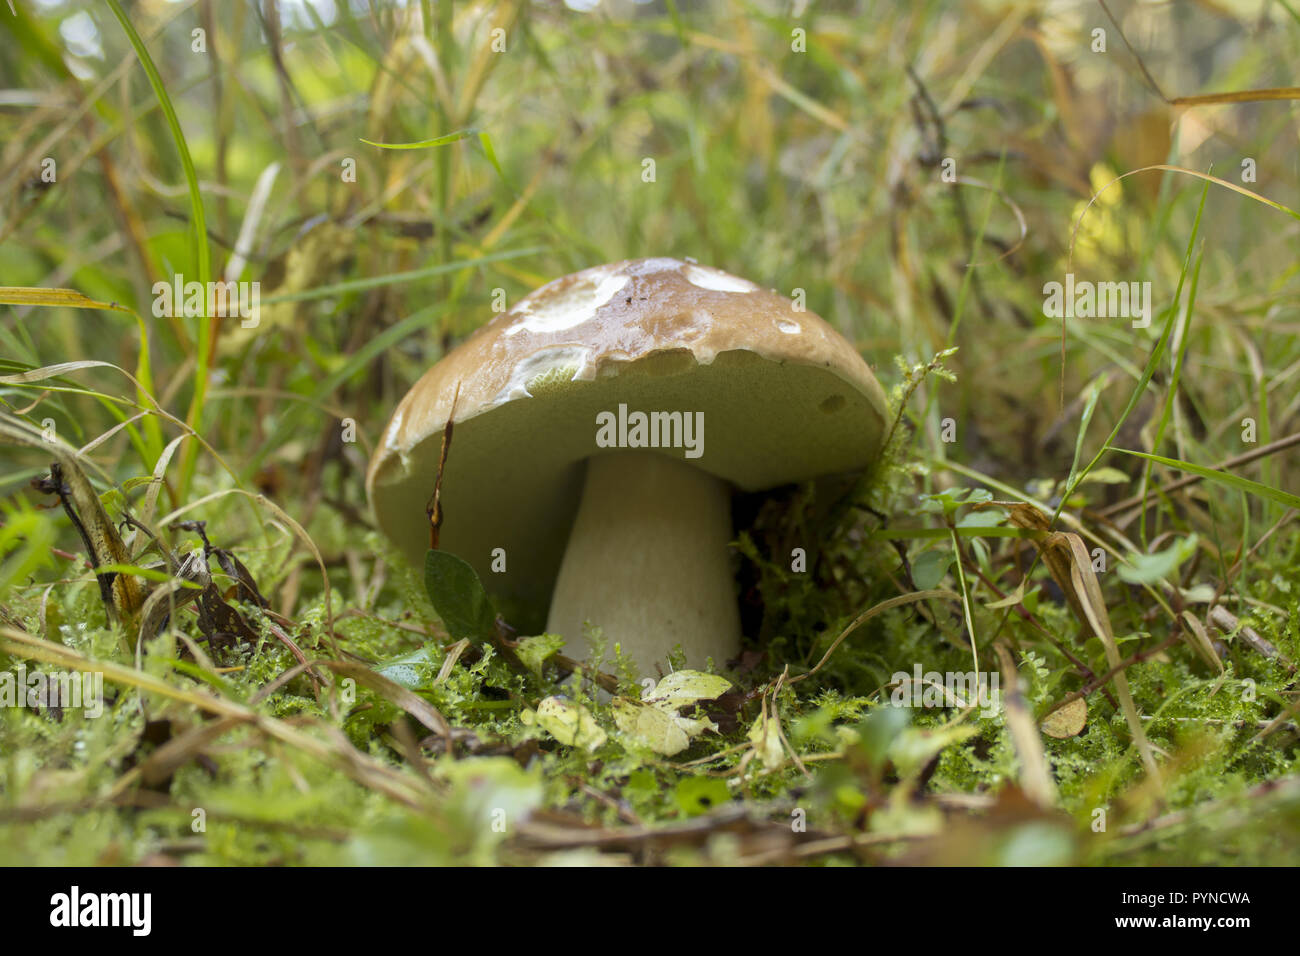 Right mushroom in the grass in the forest Stock Photo